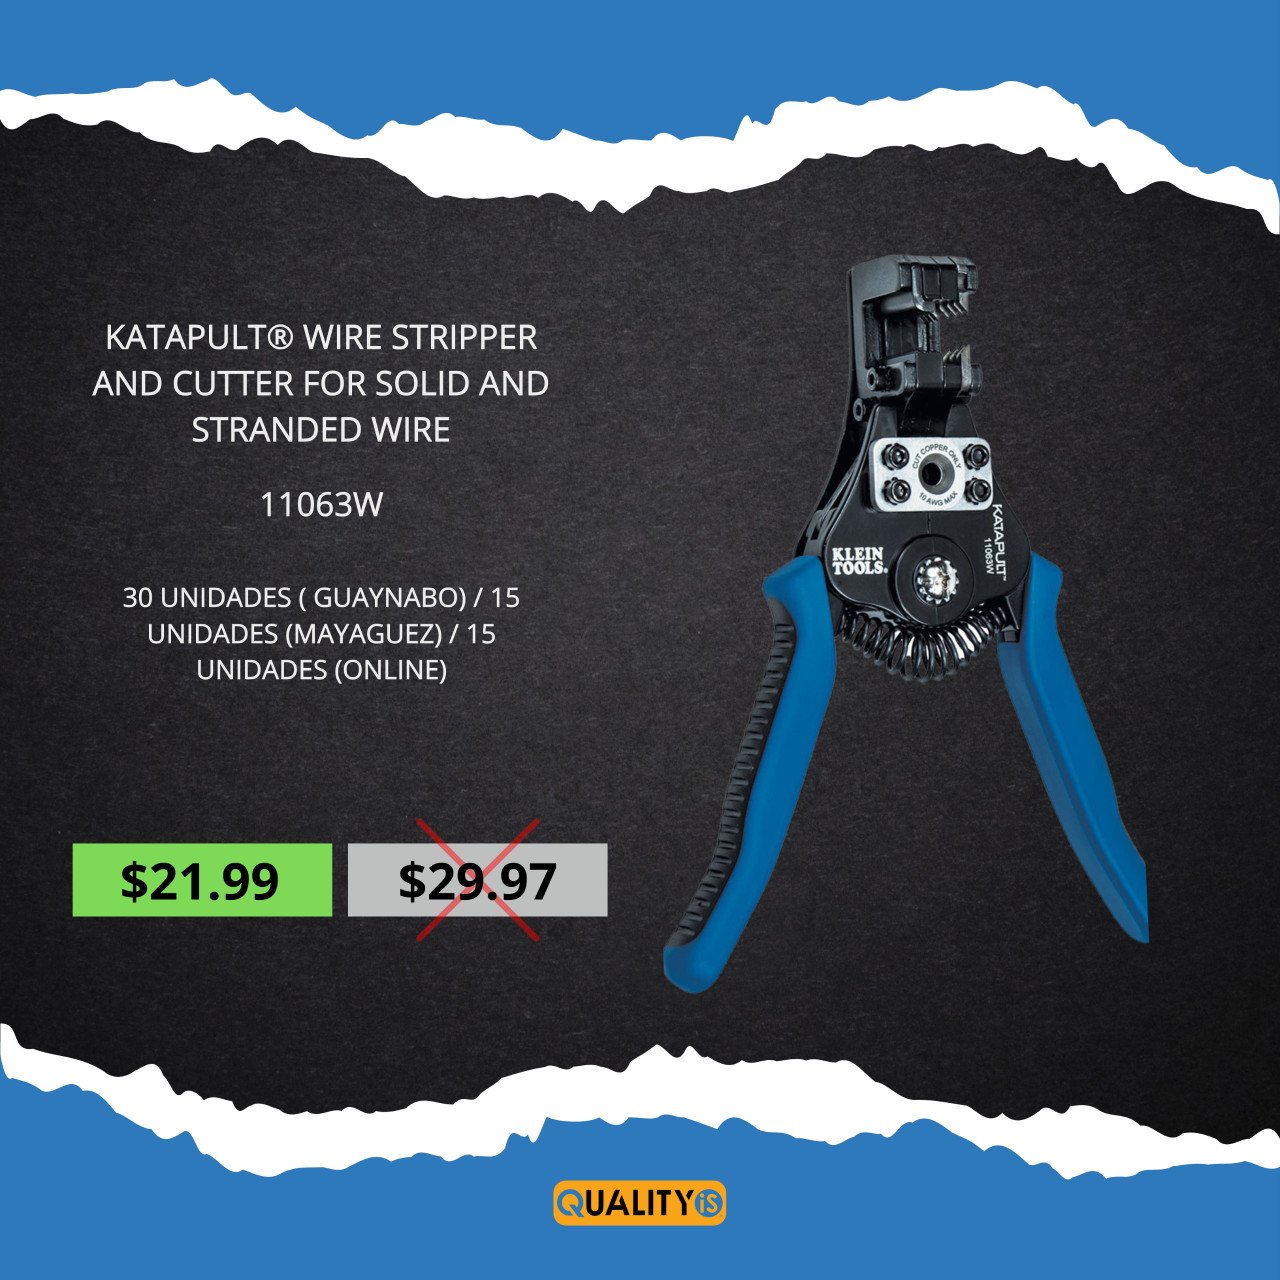 Katapult® Wire Stripper and Cutter for Solid and Stranded Wire *** Black Friday Special ***